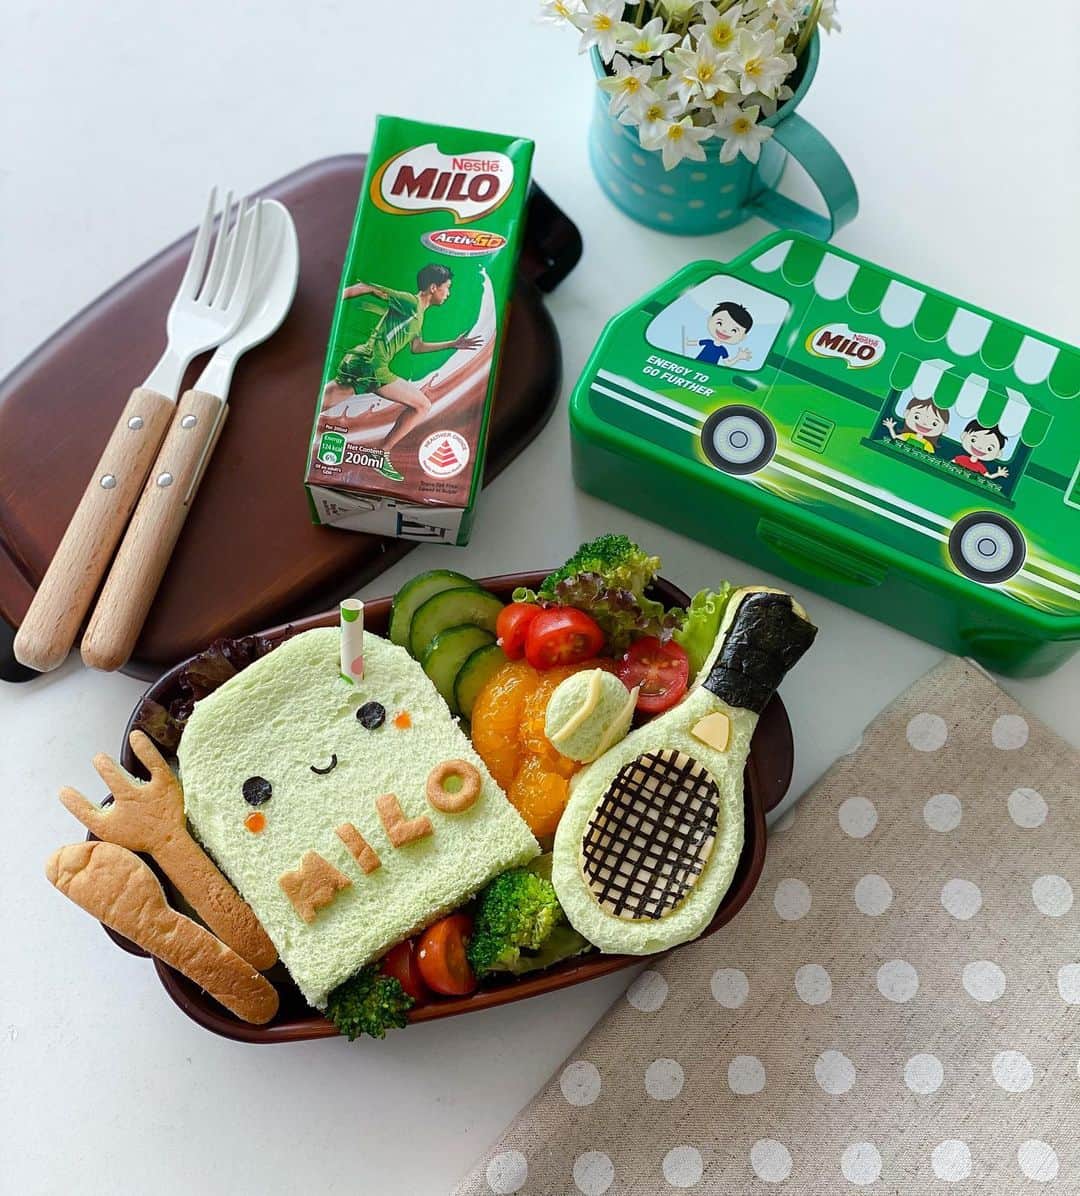 Little Miss Bento・Shirley シャリーのインスタグラム：「Time for a fun and quick breakfast recipe for your kids as they head back to school. A nourishing breakfast meal with MILO @milosingapore that contains MILK+MORE, giving kids the calcium and protein of milk plus vitamins & minerals!   Pandan bread sandwich with salad,  Ingredients  Pandan bread  BBQ chicken breast  Lettuce  Slice tomato  Slice cheese  Butter  Mayonnaise  Sushi seaweed  Tomato sauce (optional)   Steps  Cut the pandan bread into a rectangular shape for the “MILO” character  Fill with your favourite nutritious sandwich ingredients such as bbq chicken breast, lettuce and tomato  Cut the remaining pandan bread into tennis racket and tennis ball shapes  Cut and decorate the “MILO” character’s face with sushi seaweed for features, and tomato sauce for cheeks. The words "MILO" are made using the leftover crust  Cut and decorate the tennis racket details using sushi seaweed and slice cheese Fill the rest of the bento with greens or if you like, fruits.  Pack this breakfast on-the-go meal with a MILO 200ml RTD Packet!」